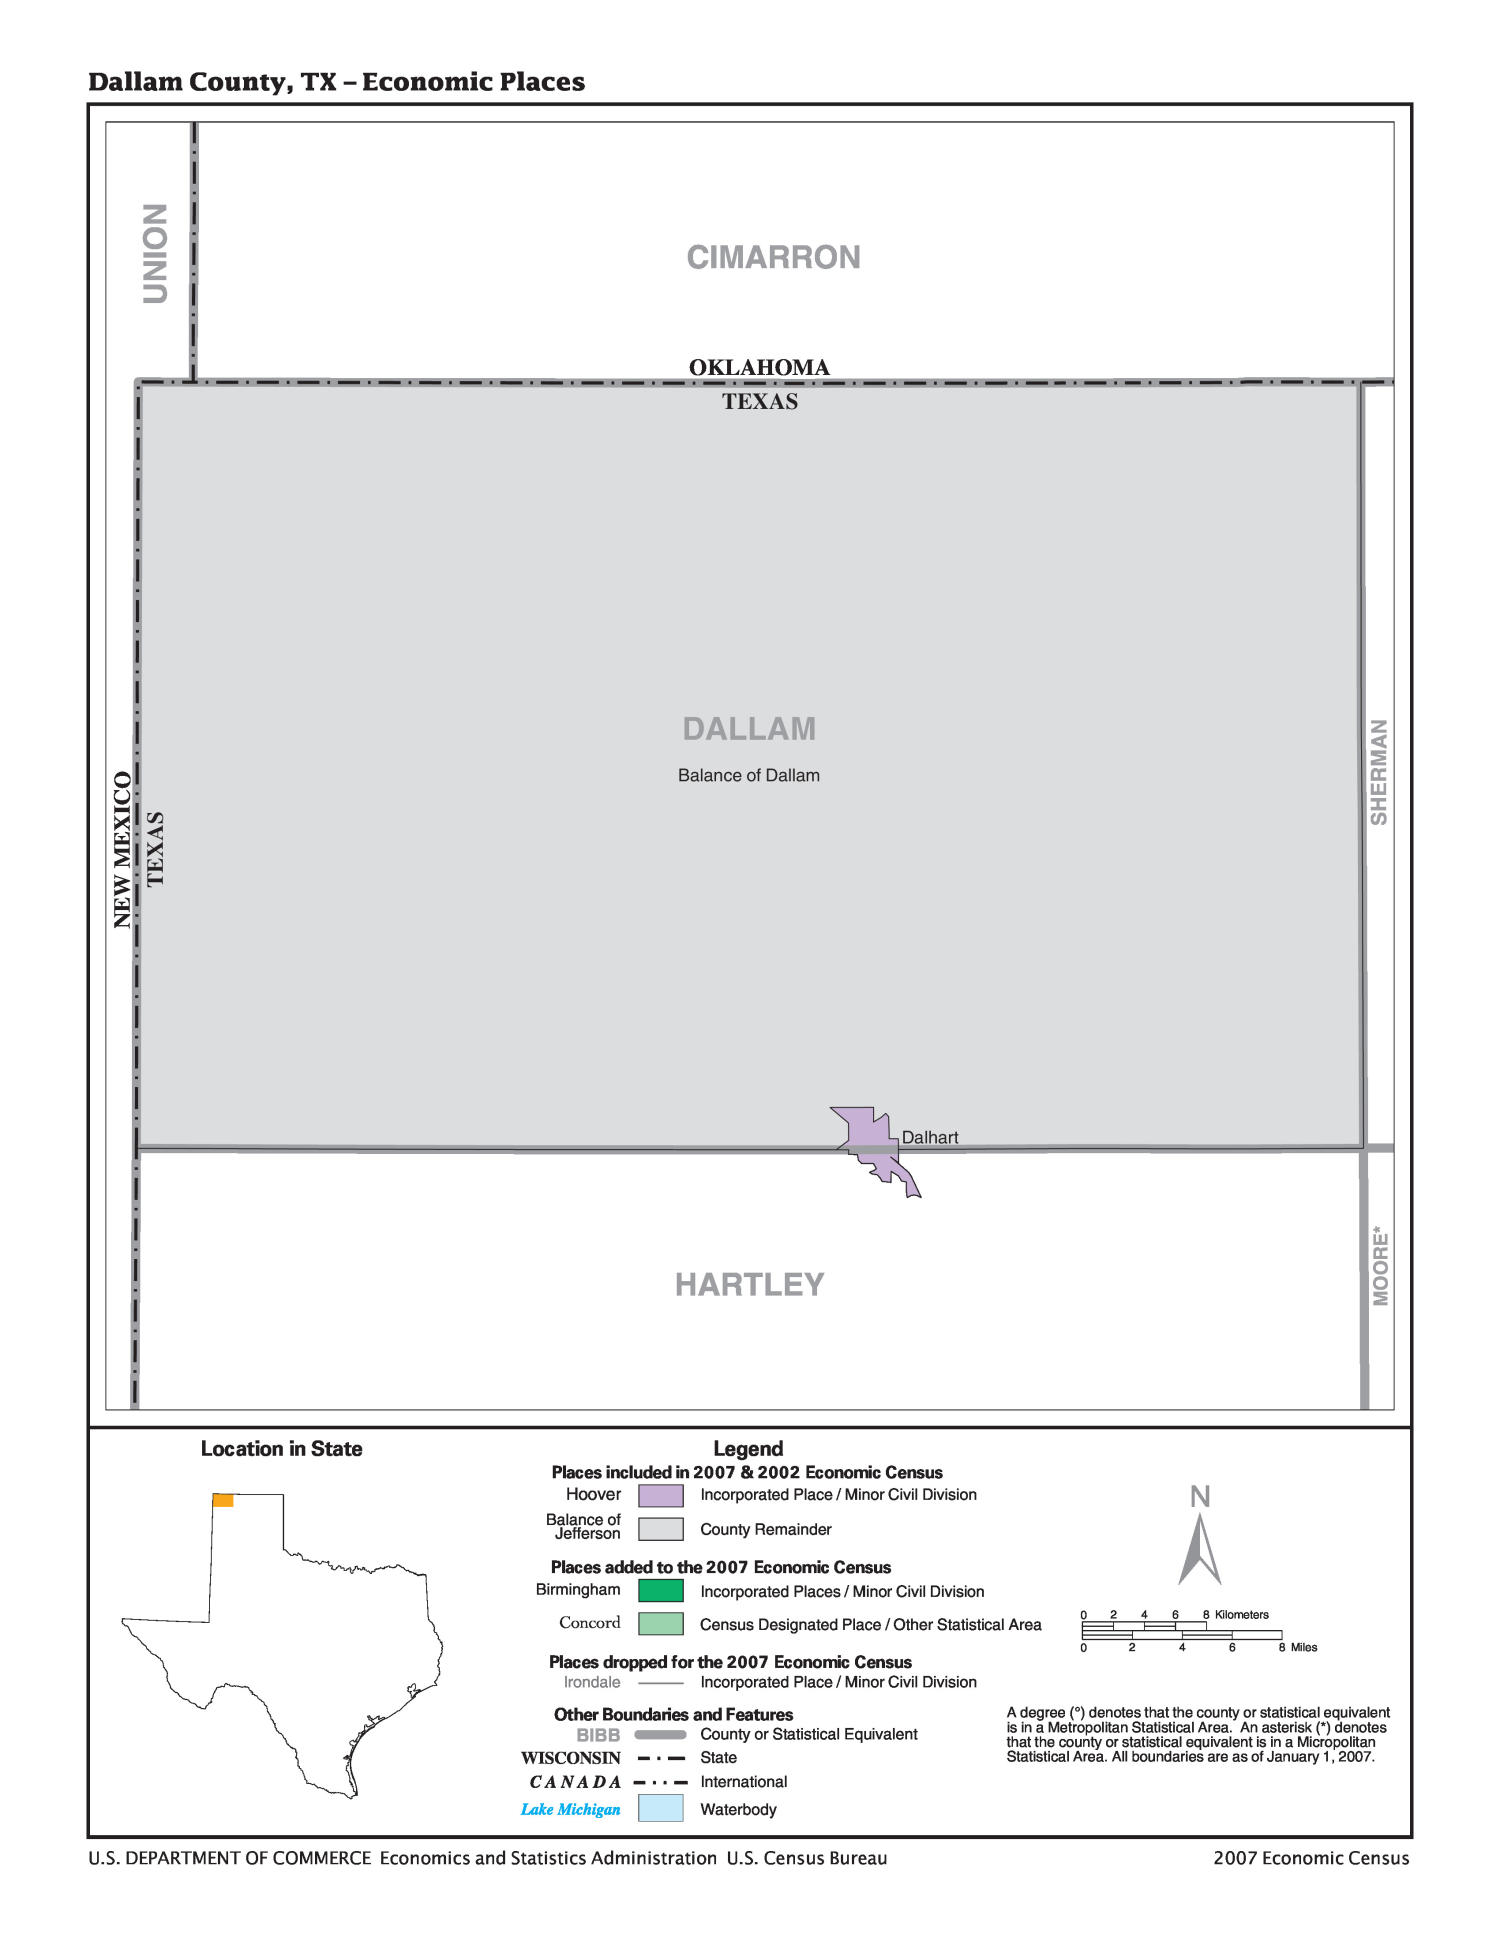 2007 Economic Census Map: Dallam County, Texas - Economic Places
                                                
                                                    [Sequence #]: 1 of 1
                                                